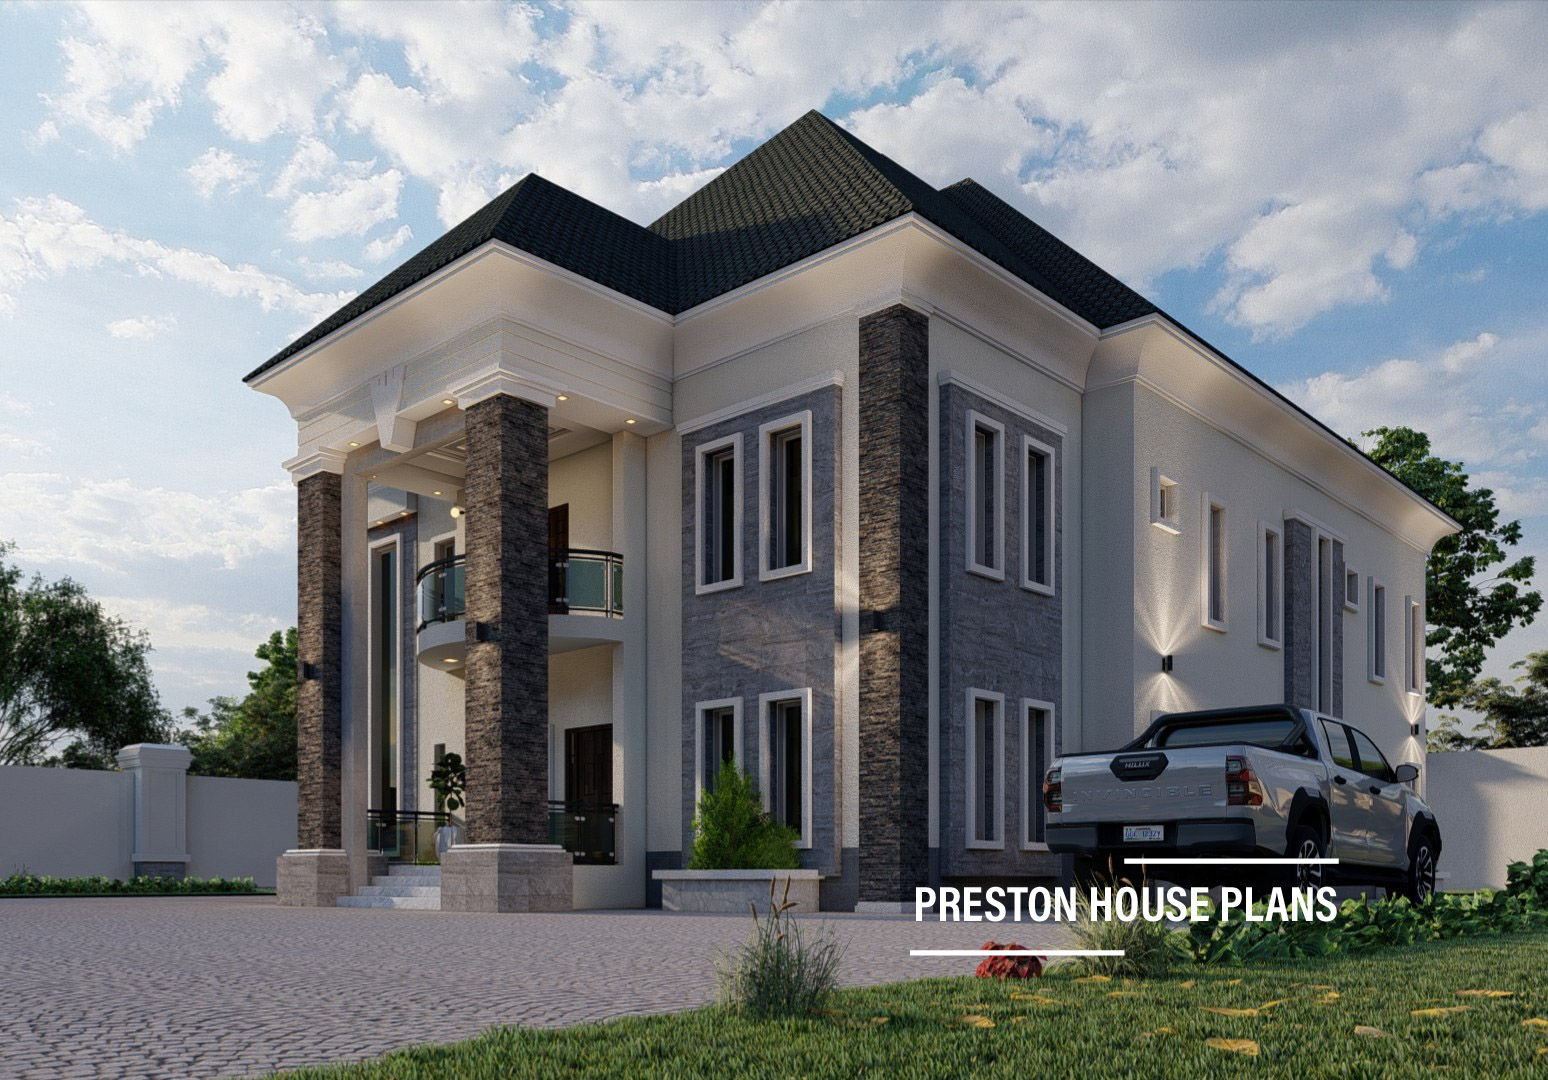 5 Bedroom Traditional Country Home Duplex Design